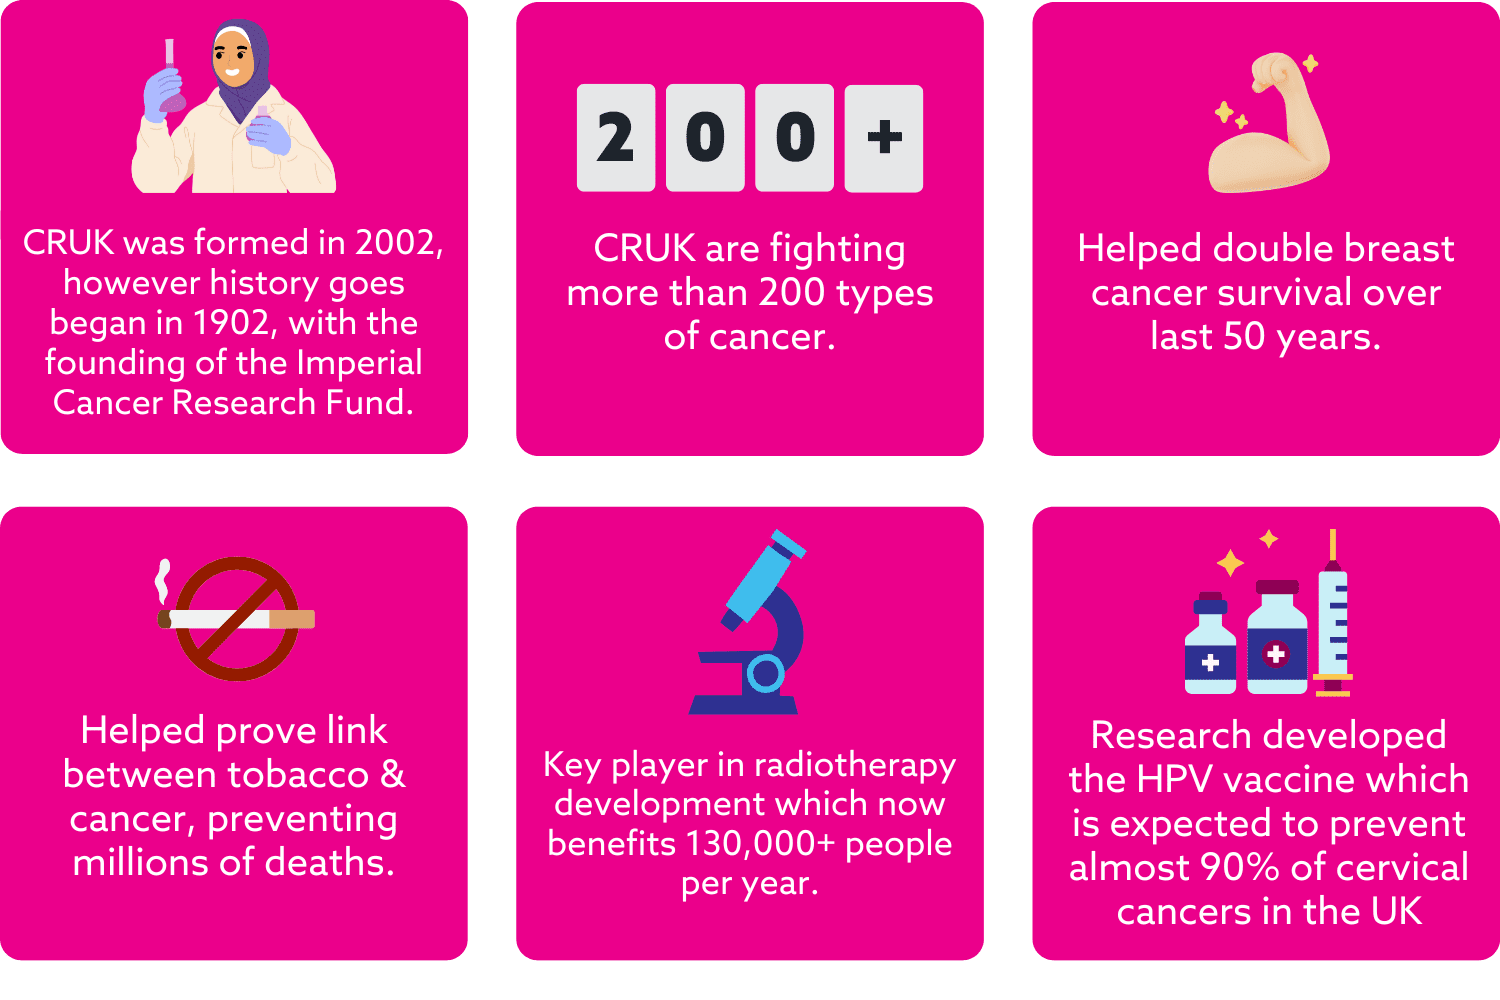 CRUK are fighting more than 200 types of cancer.